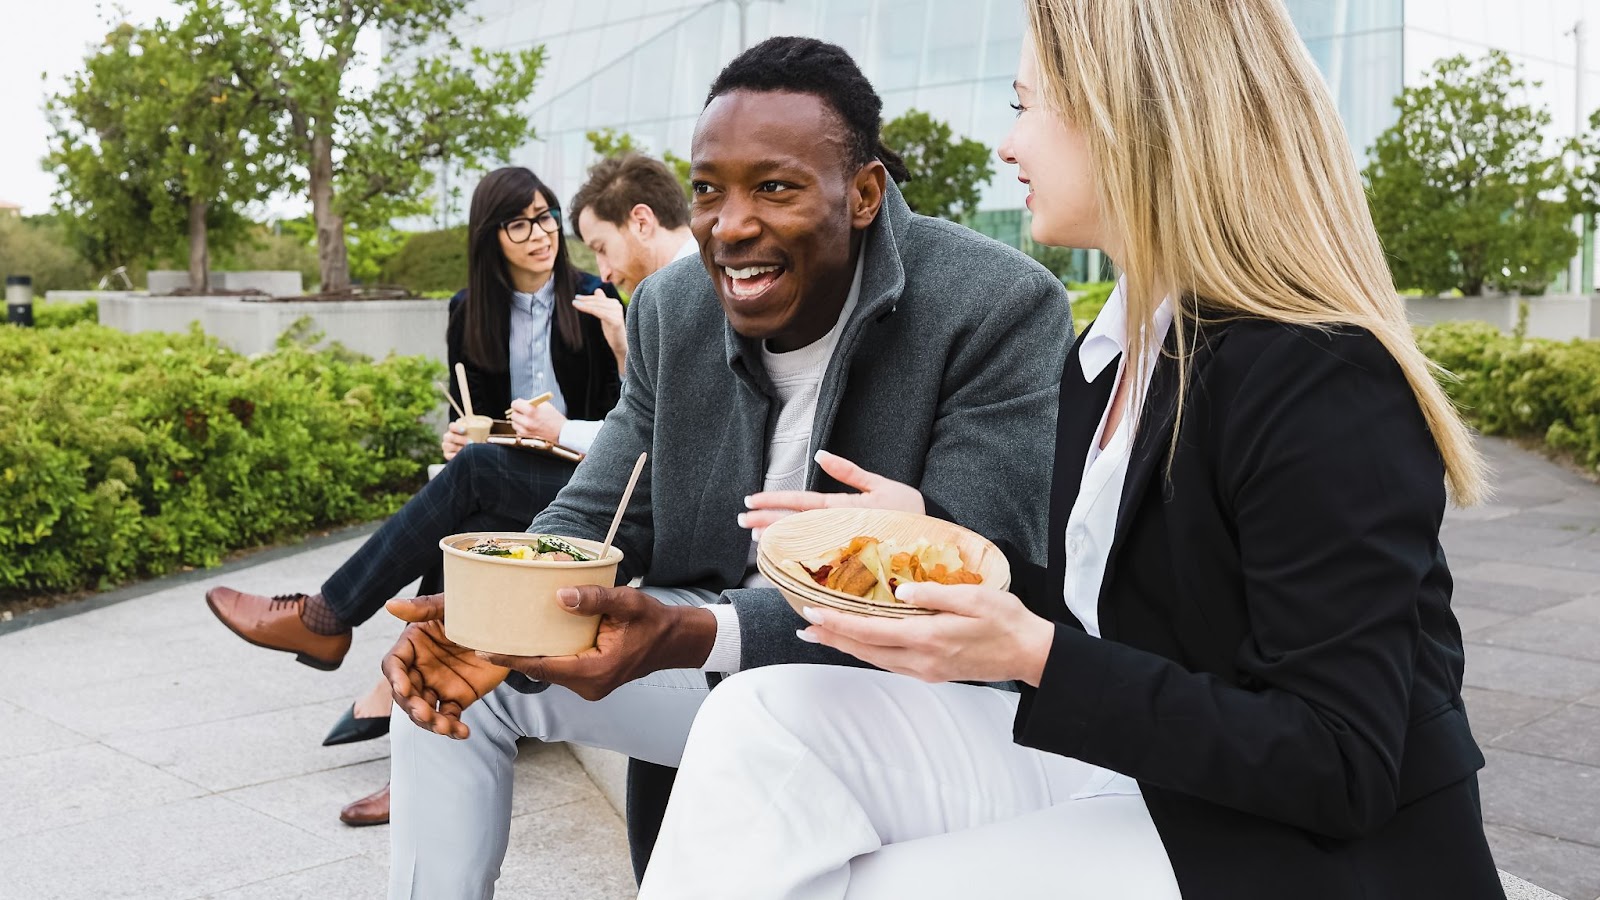 Business employees eating healthy lunch together on bench